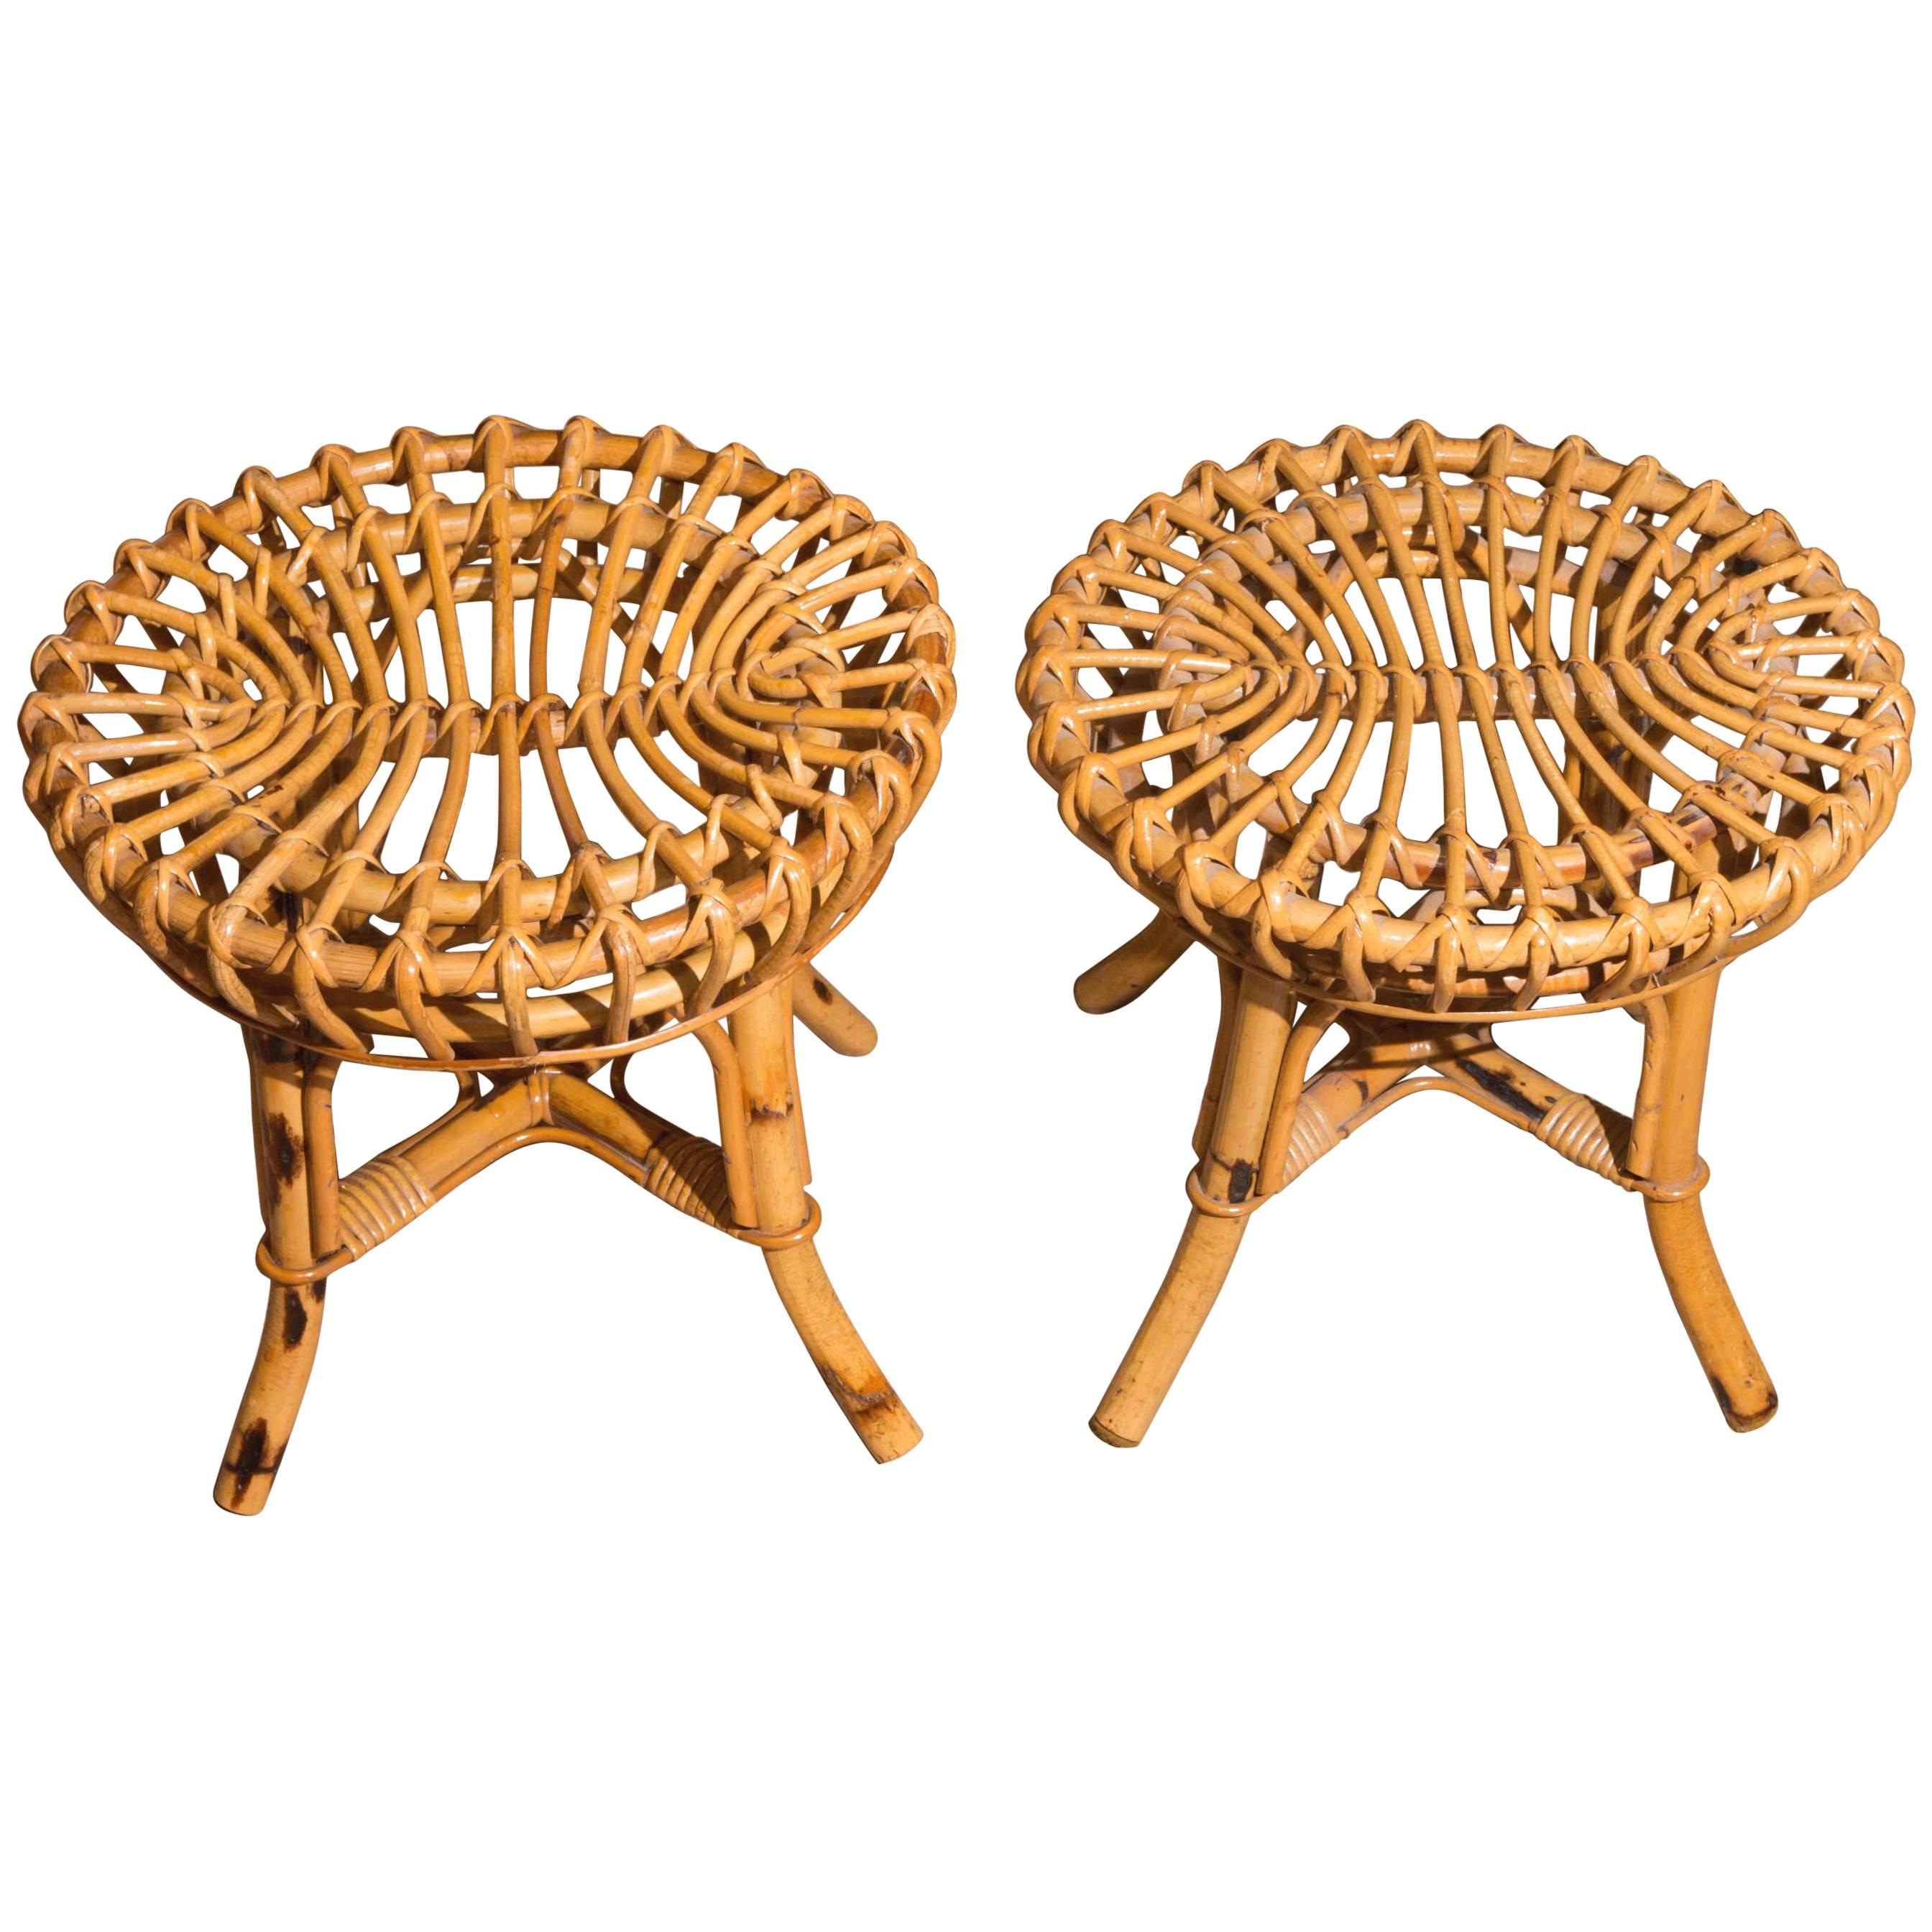 Pair of Vintage Bamboo Stools